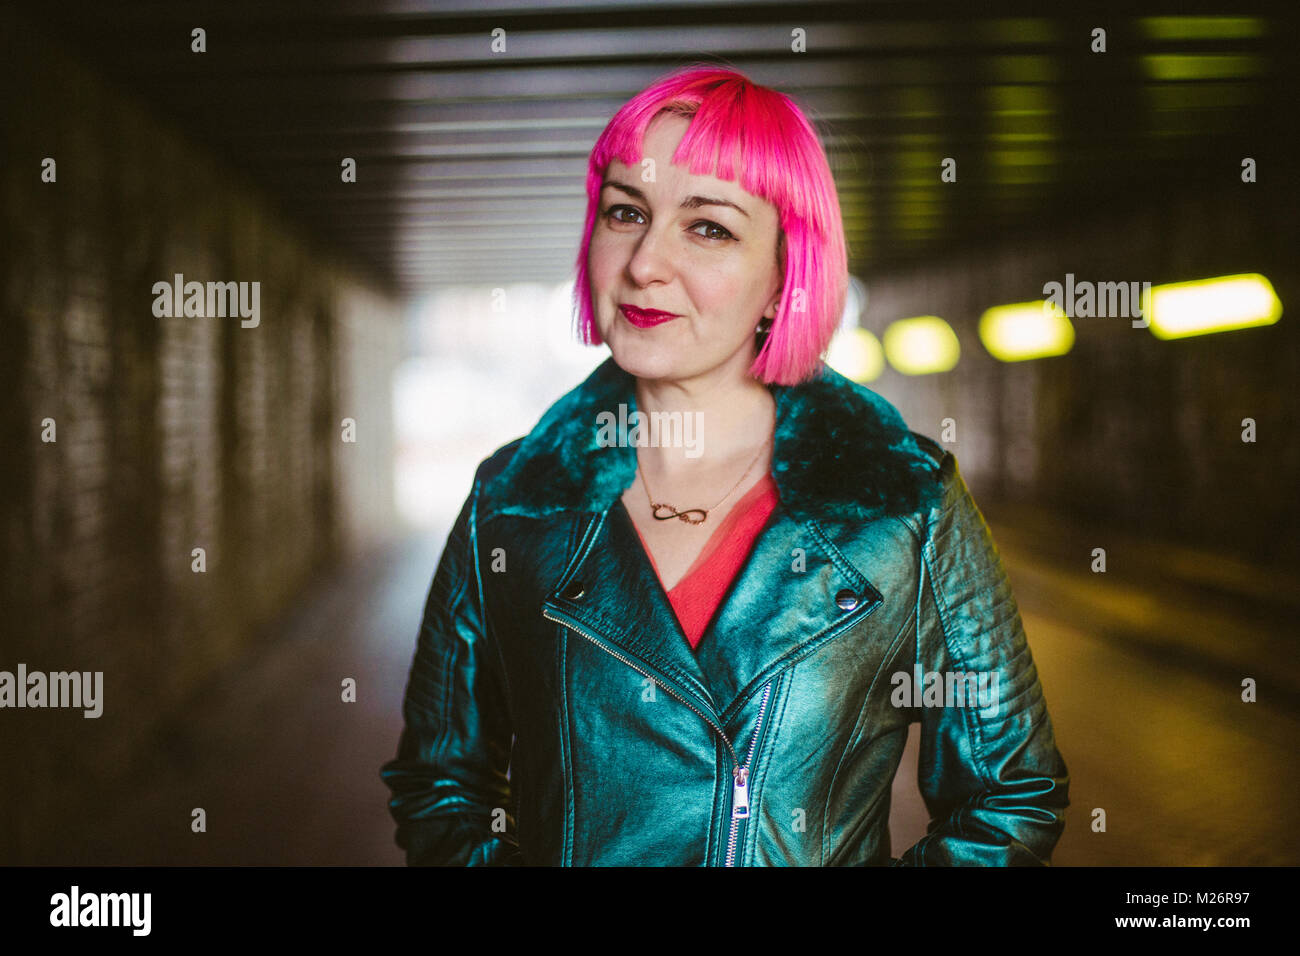 A woman with pink hair stands in an alley way looking bold. Stock Photo